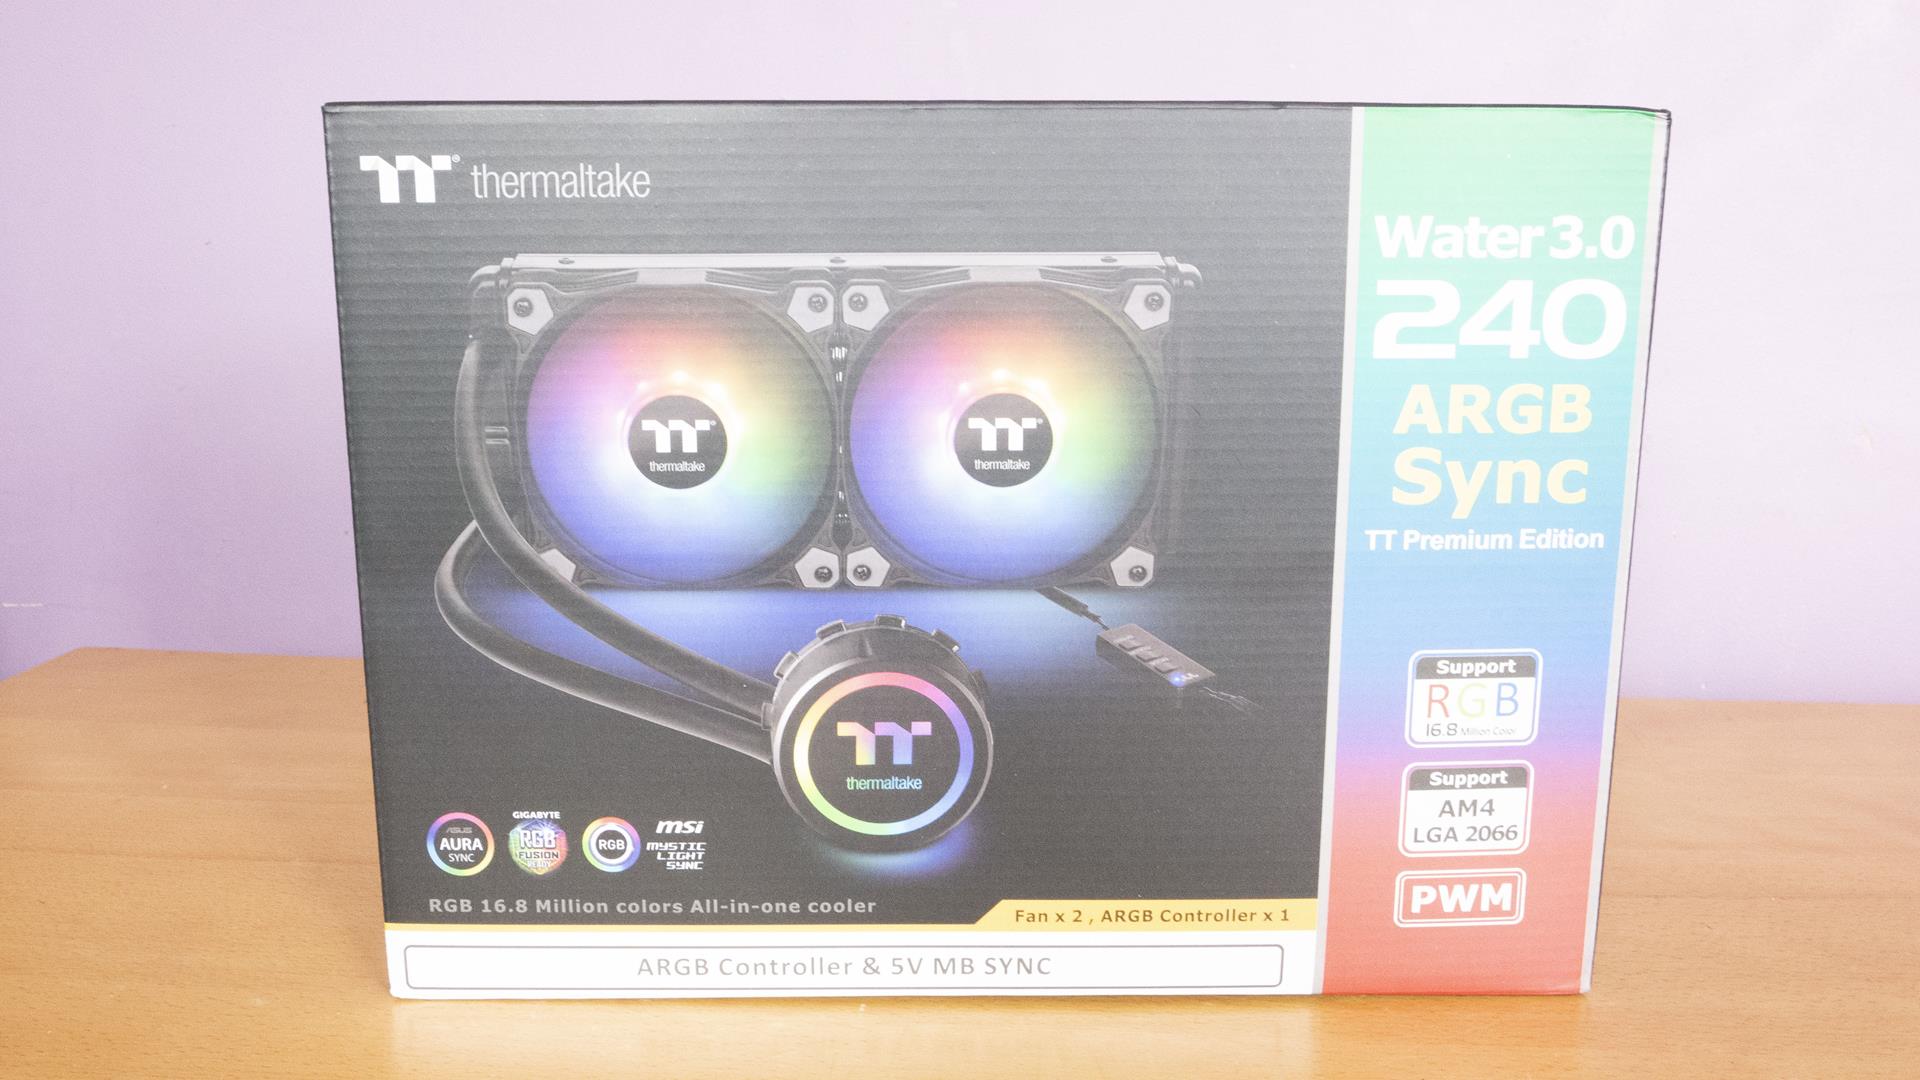 thermaltake water 3.0 240mm argb sync review